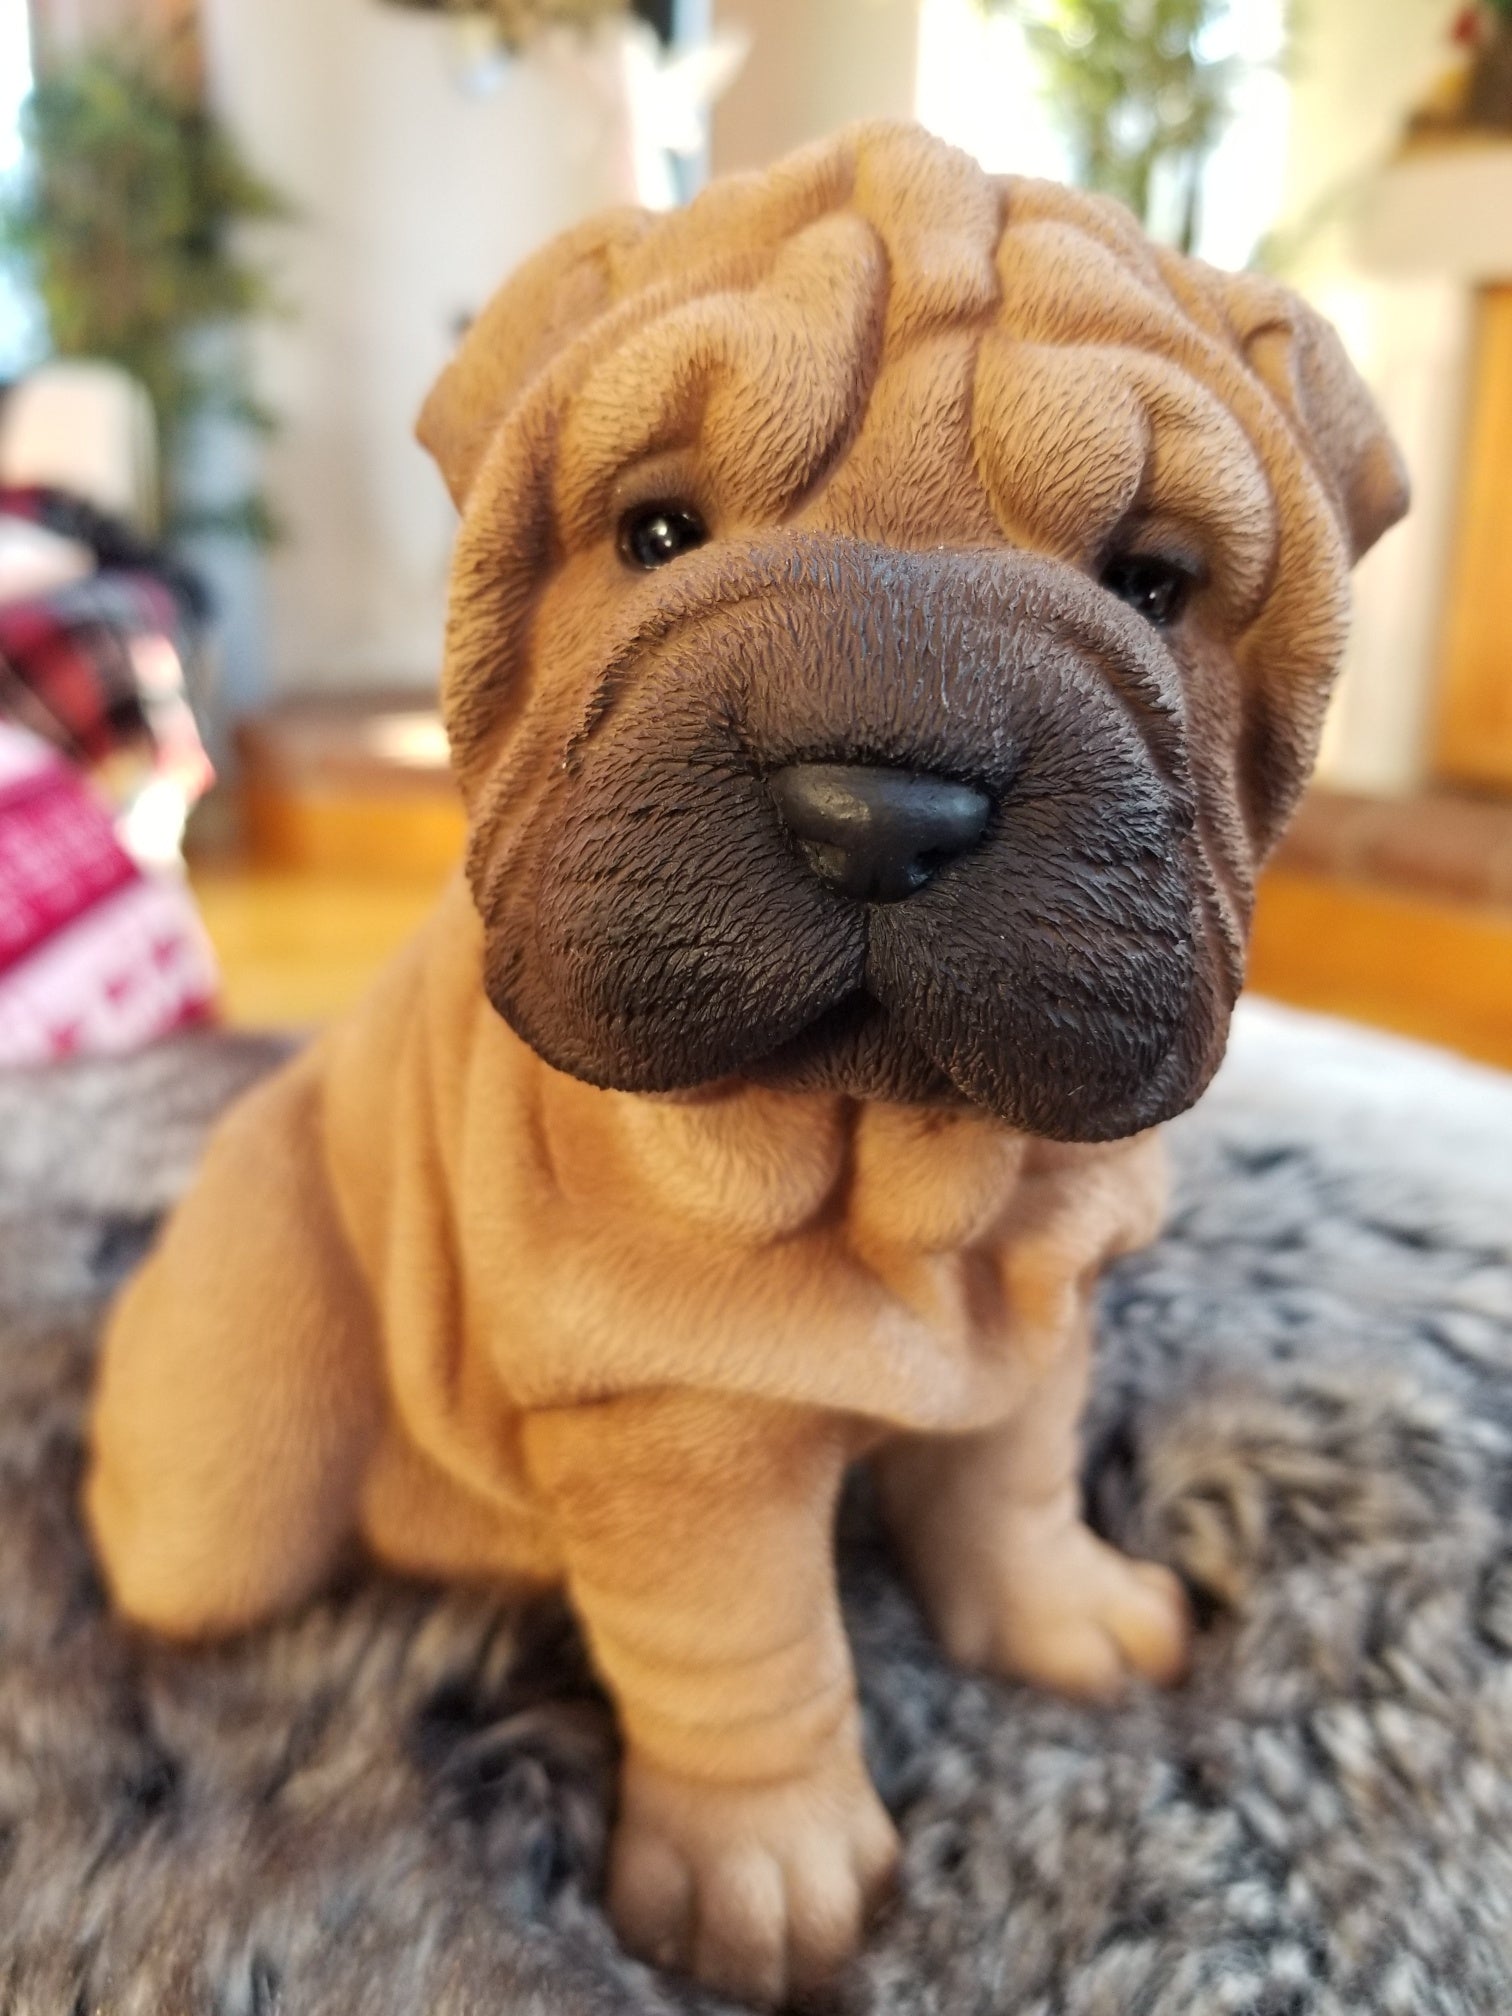 buy a shar pei puppy statue at auction